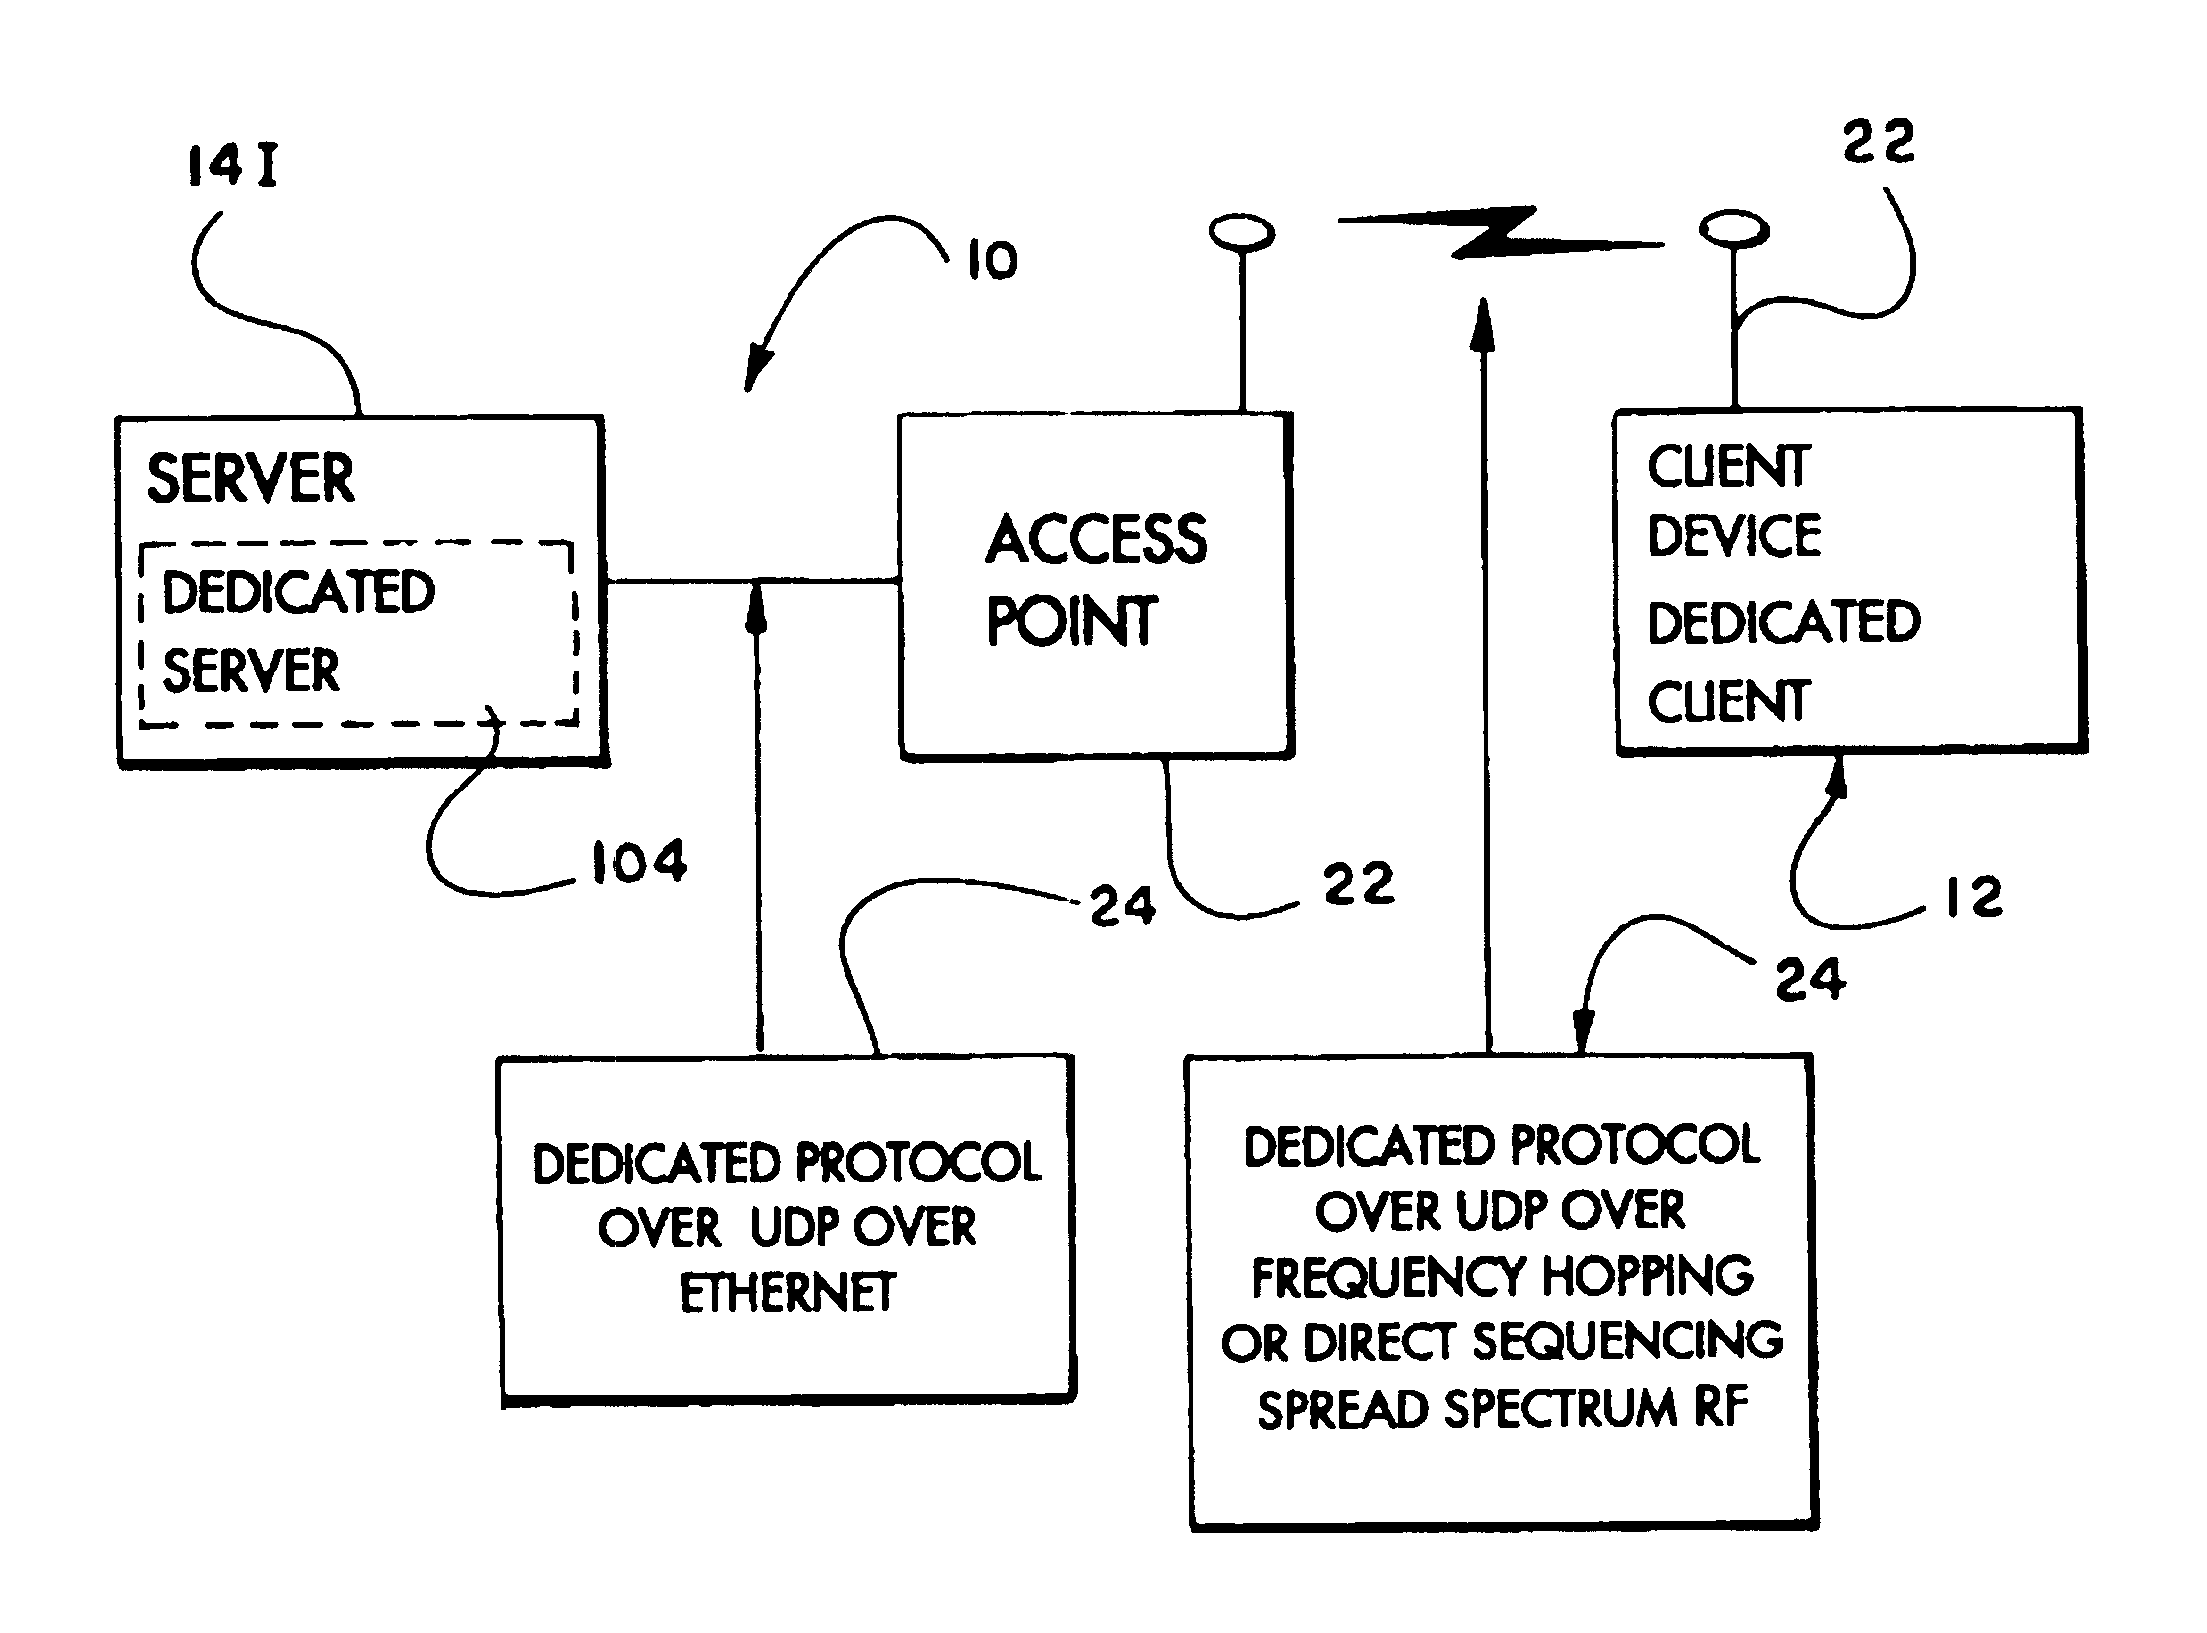 Method and apparatus allowing a limited client device to use the full resources of a networked server